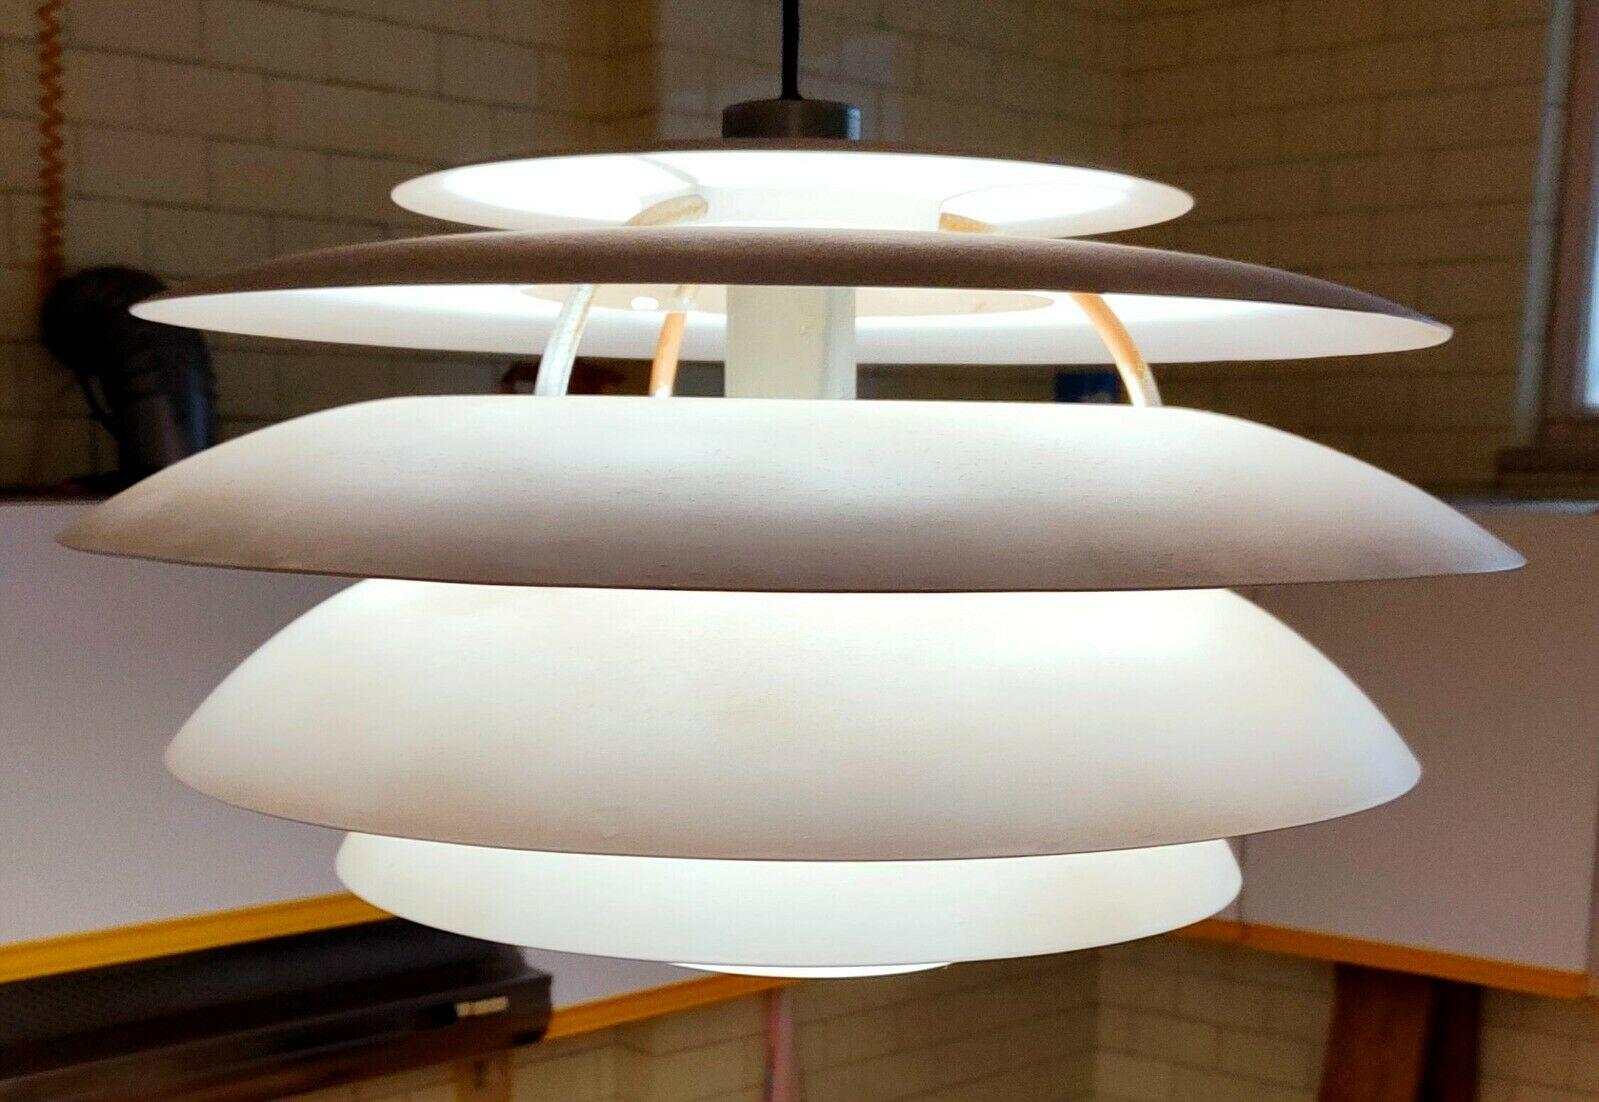 Original Stilnovo chandelier, model 1262, original from the 1960s, made of aluminum with 5 bands in addition to the lower part, light grey color

it measures just under 60 cm in diameter, 30 cm the height of the illuminated part only, adjustable